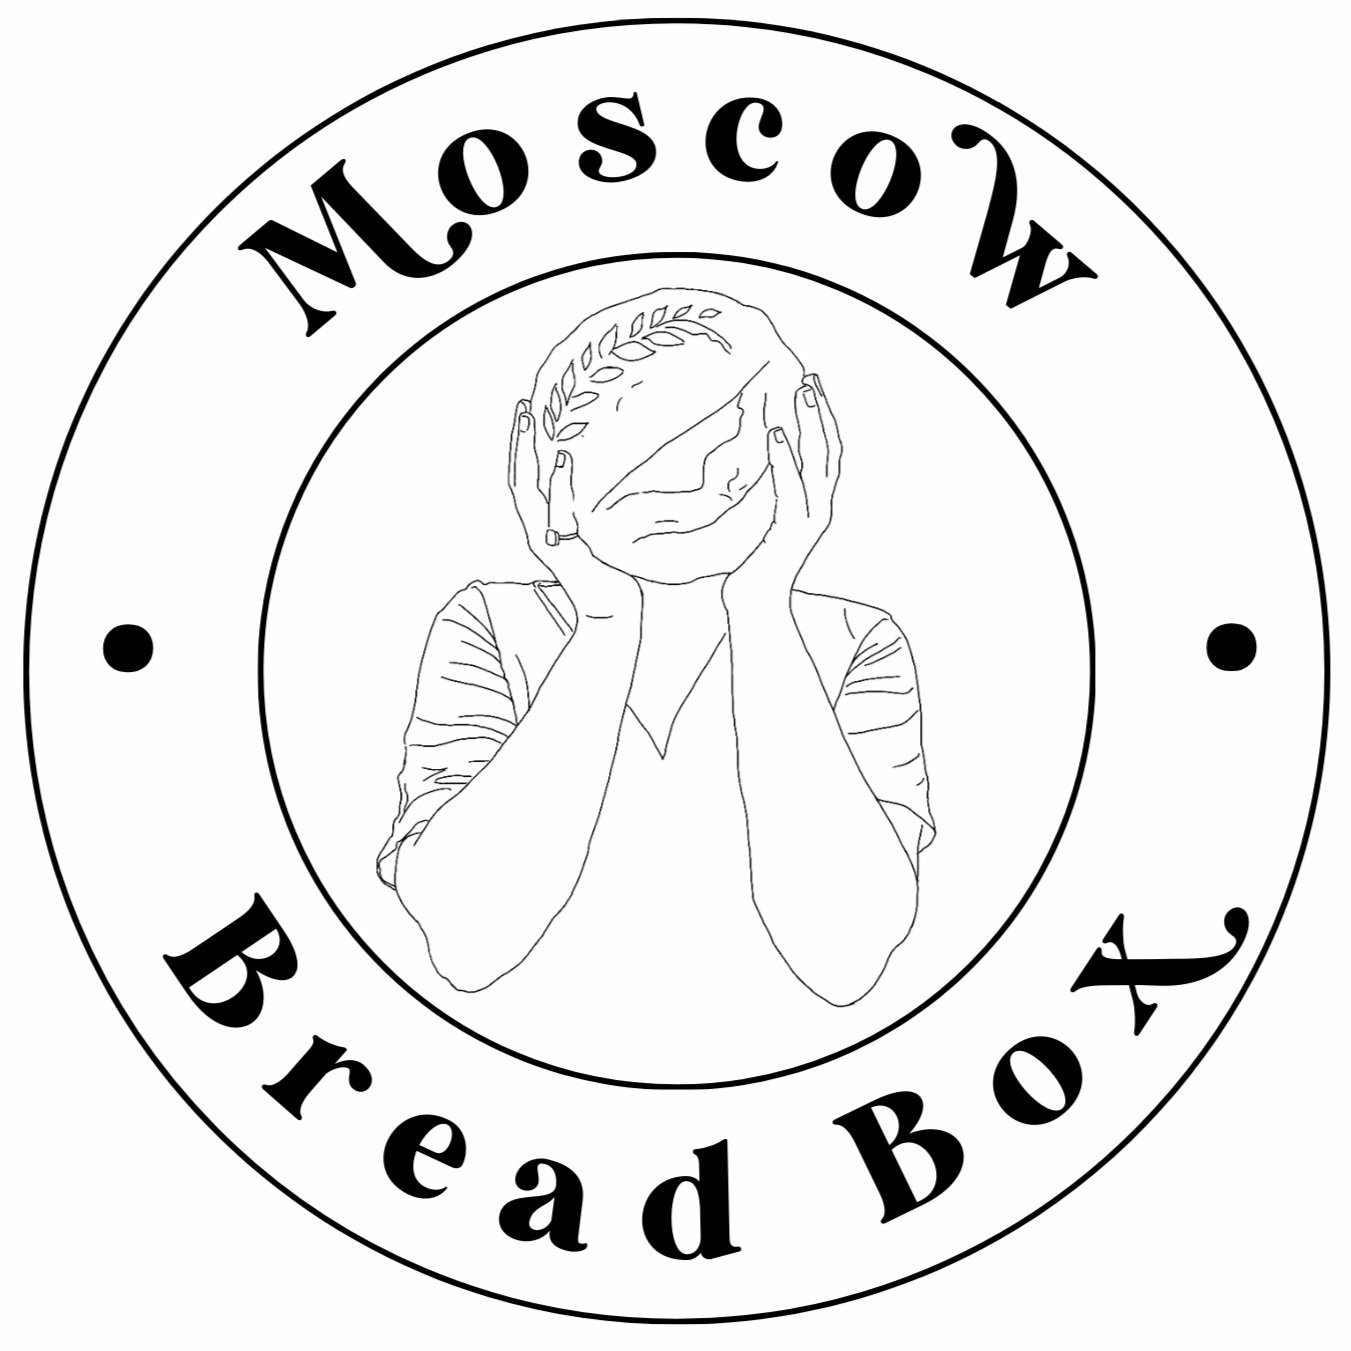 Moscow Bread Box